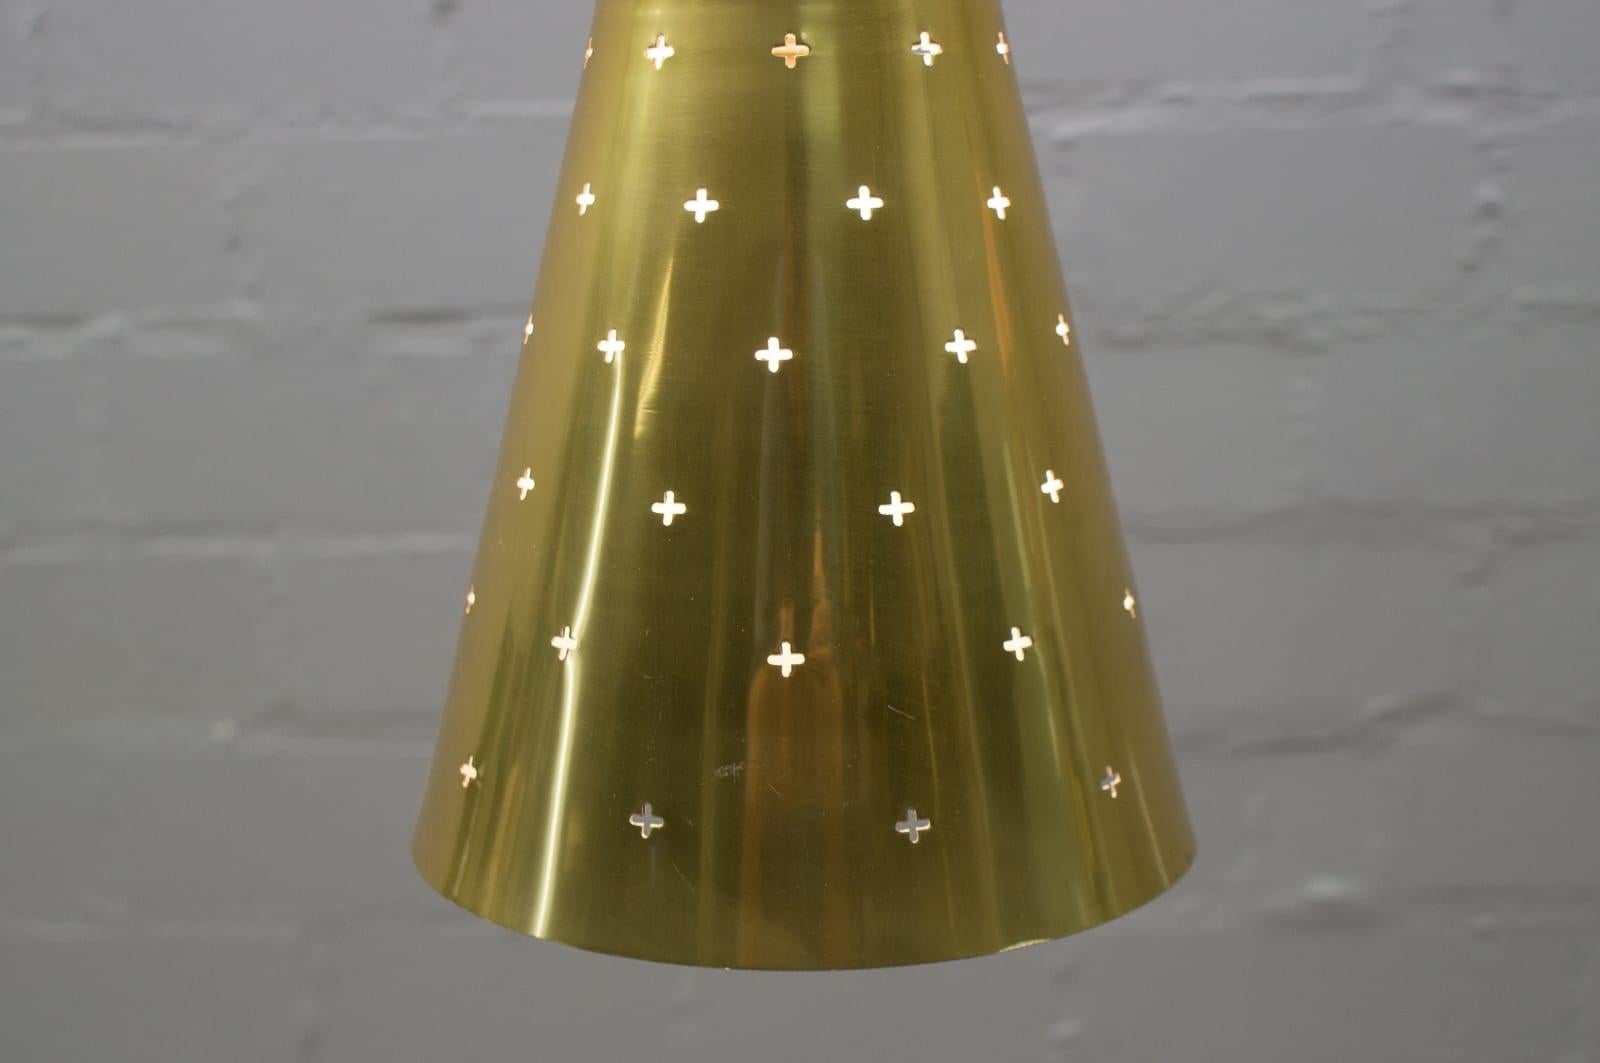 Mid-Century Modern Diabolo Pendant Lamp by Hillebrand, 1950s, Germany For Sale 3